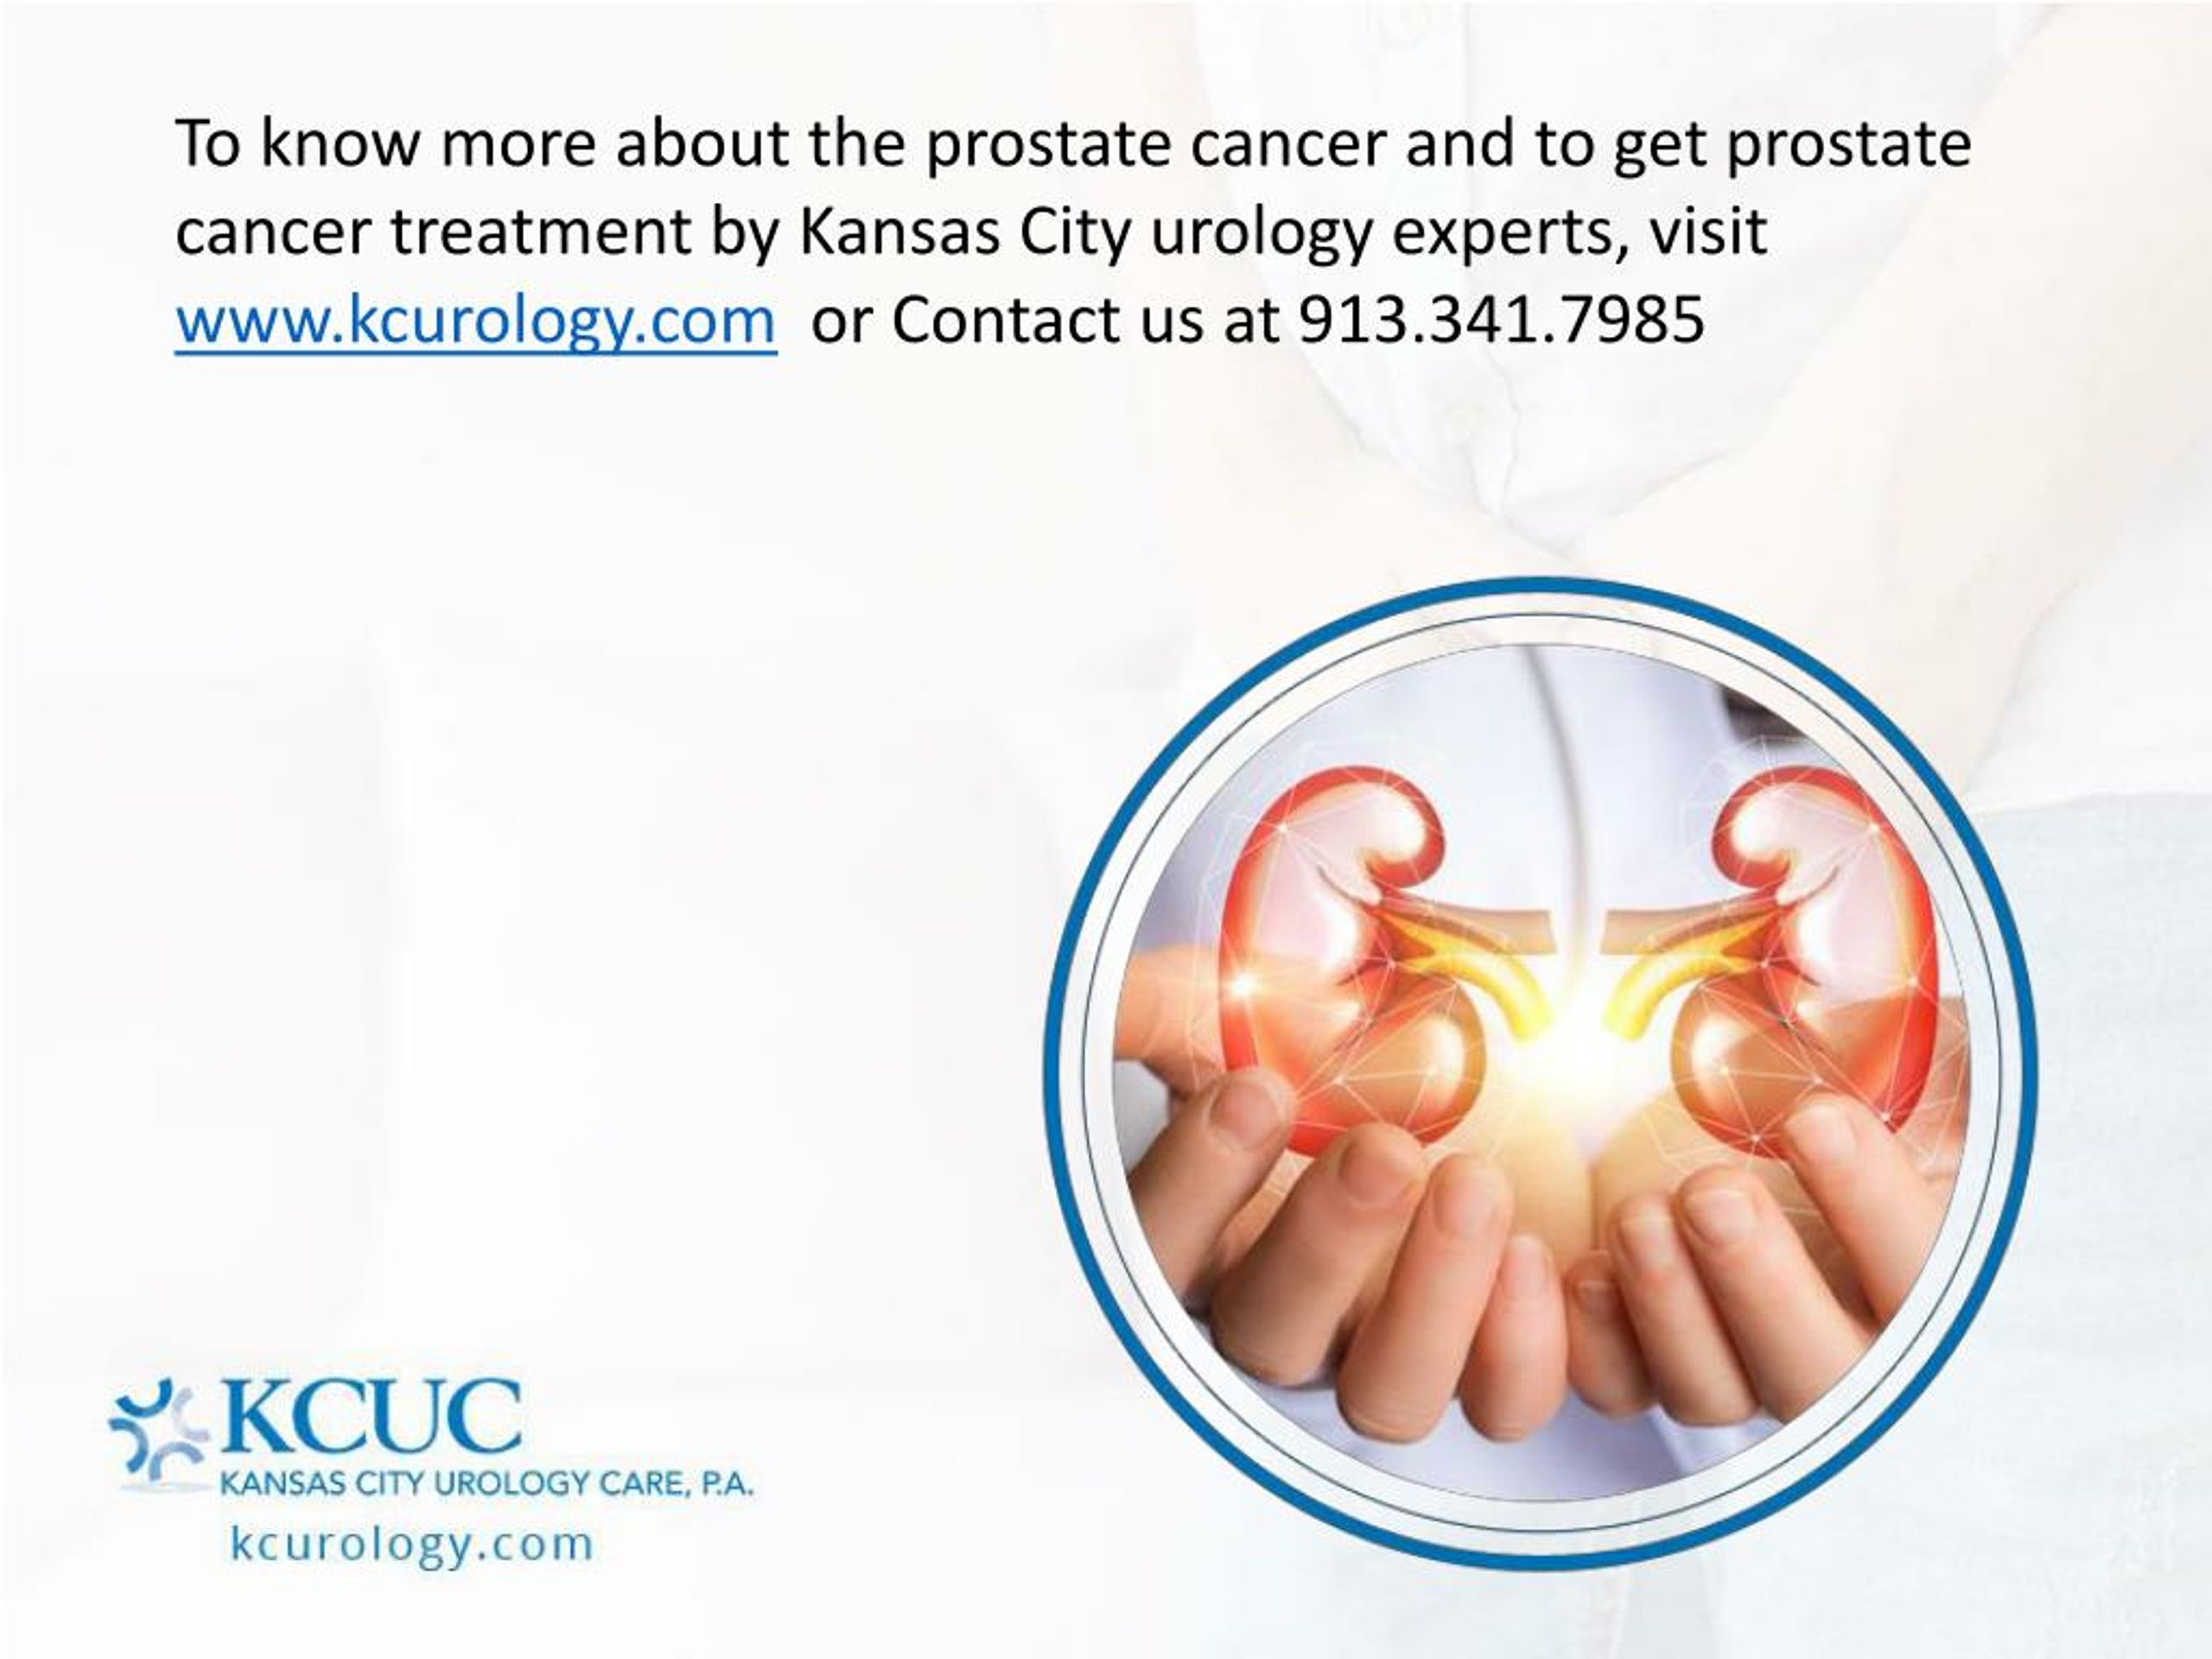 Ppt Kansas City Urology Care Cancer Medical Review Powerpoint 4391